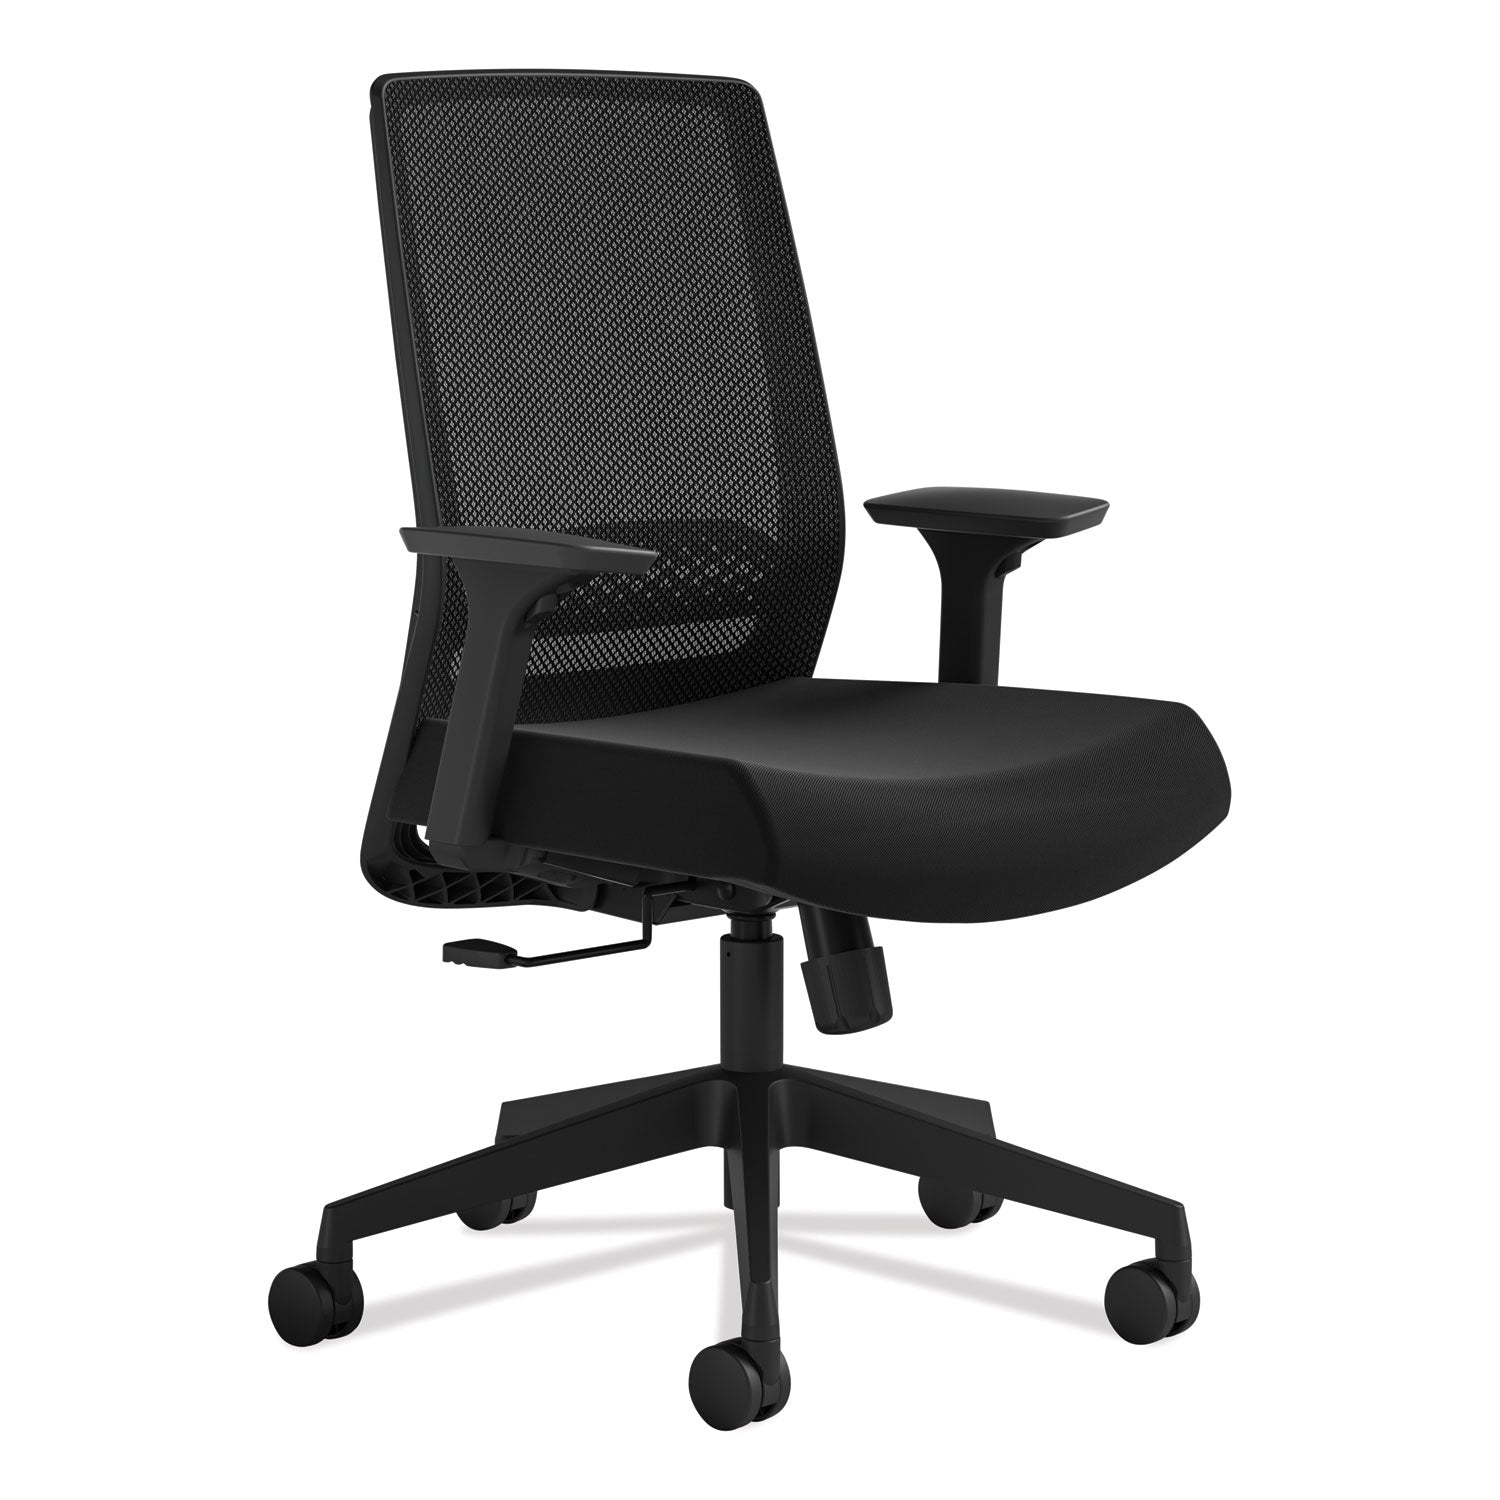 medina-basic-task-chair-supports-up-to-275-lb-18-to-22-seat-height-black_saf6830bmbl - 1